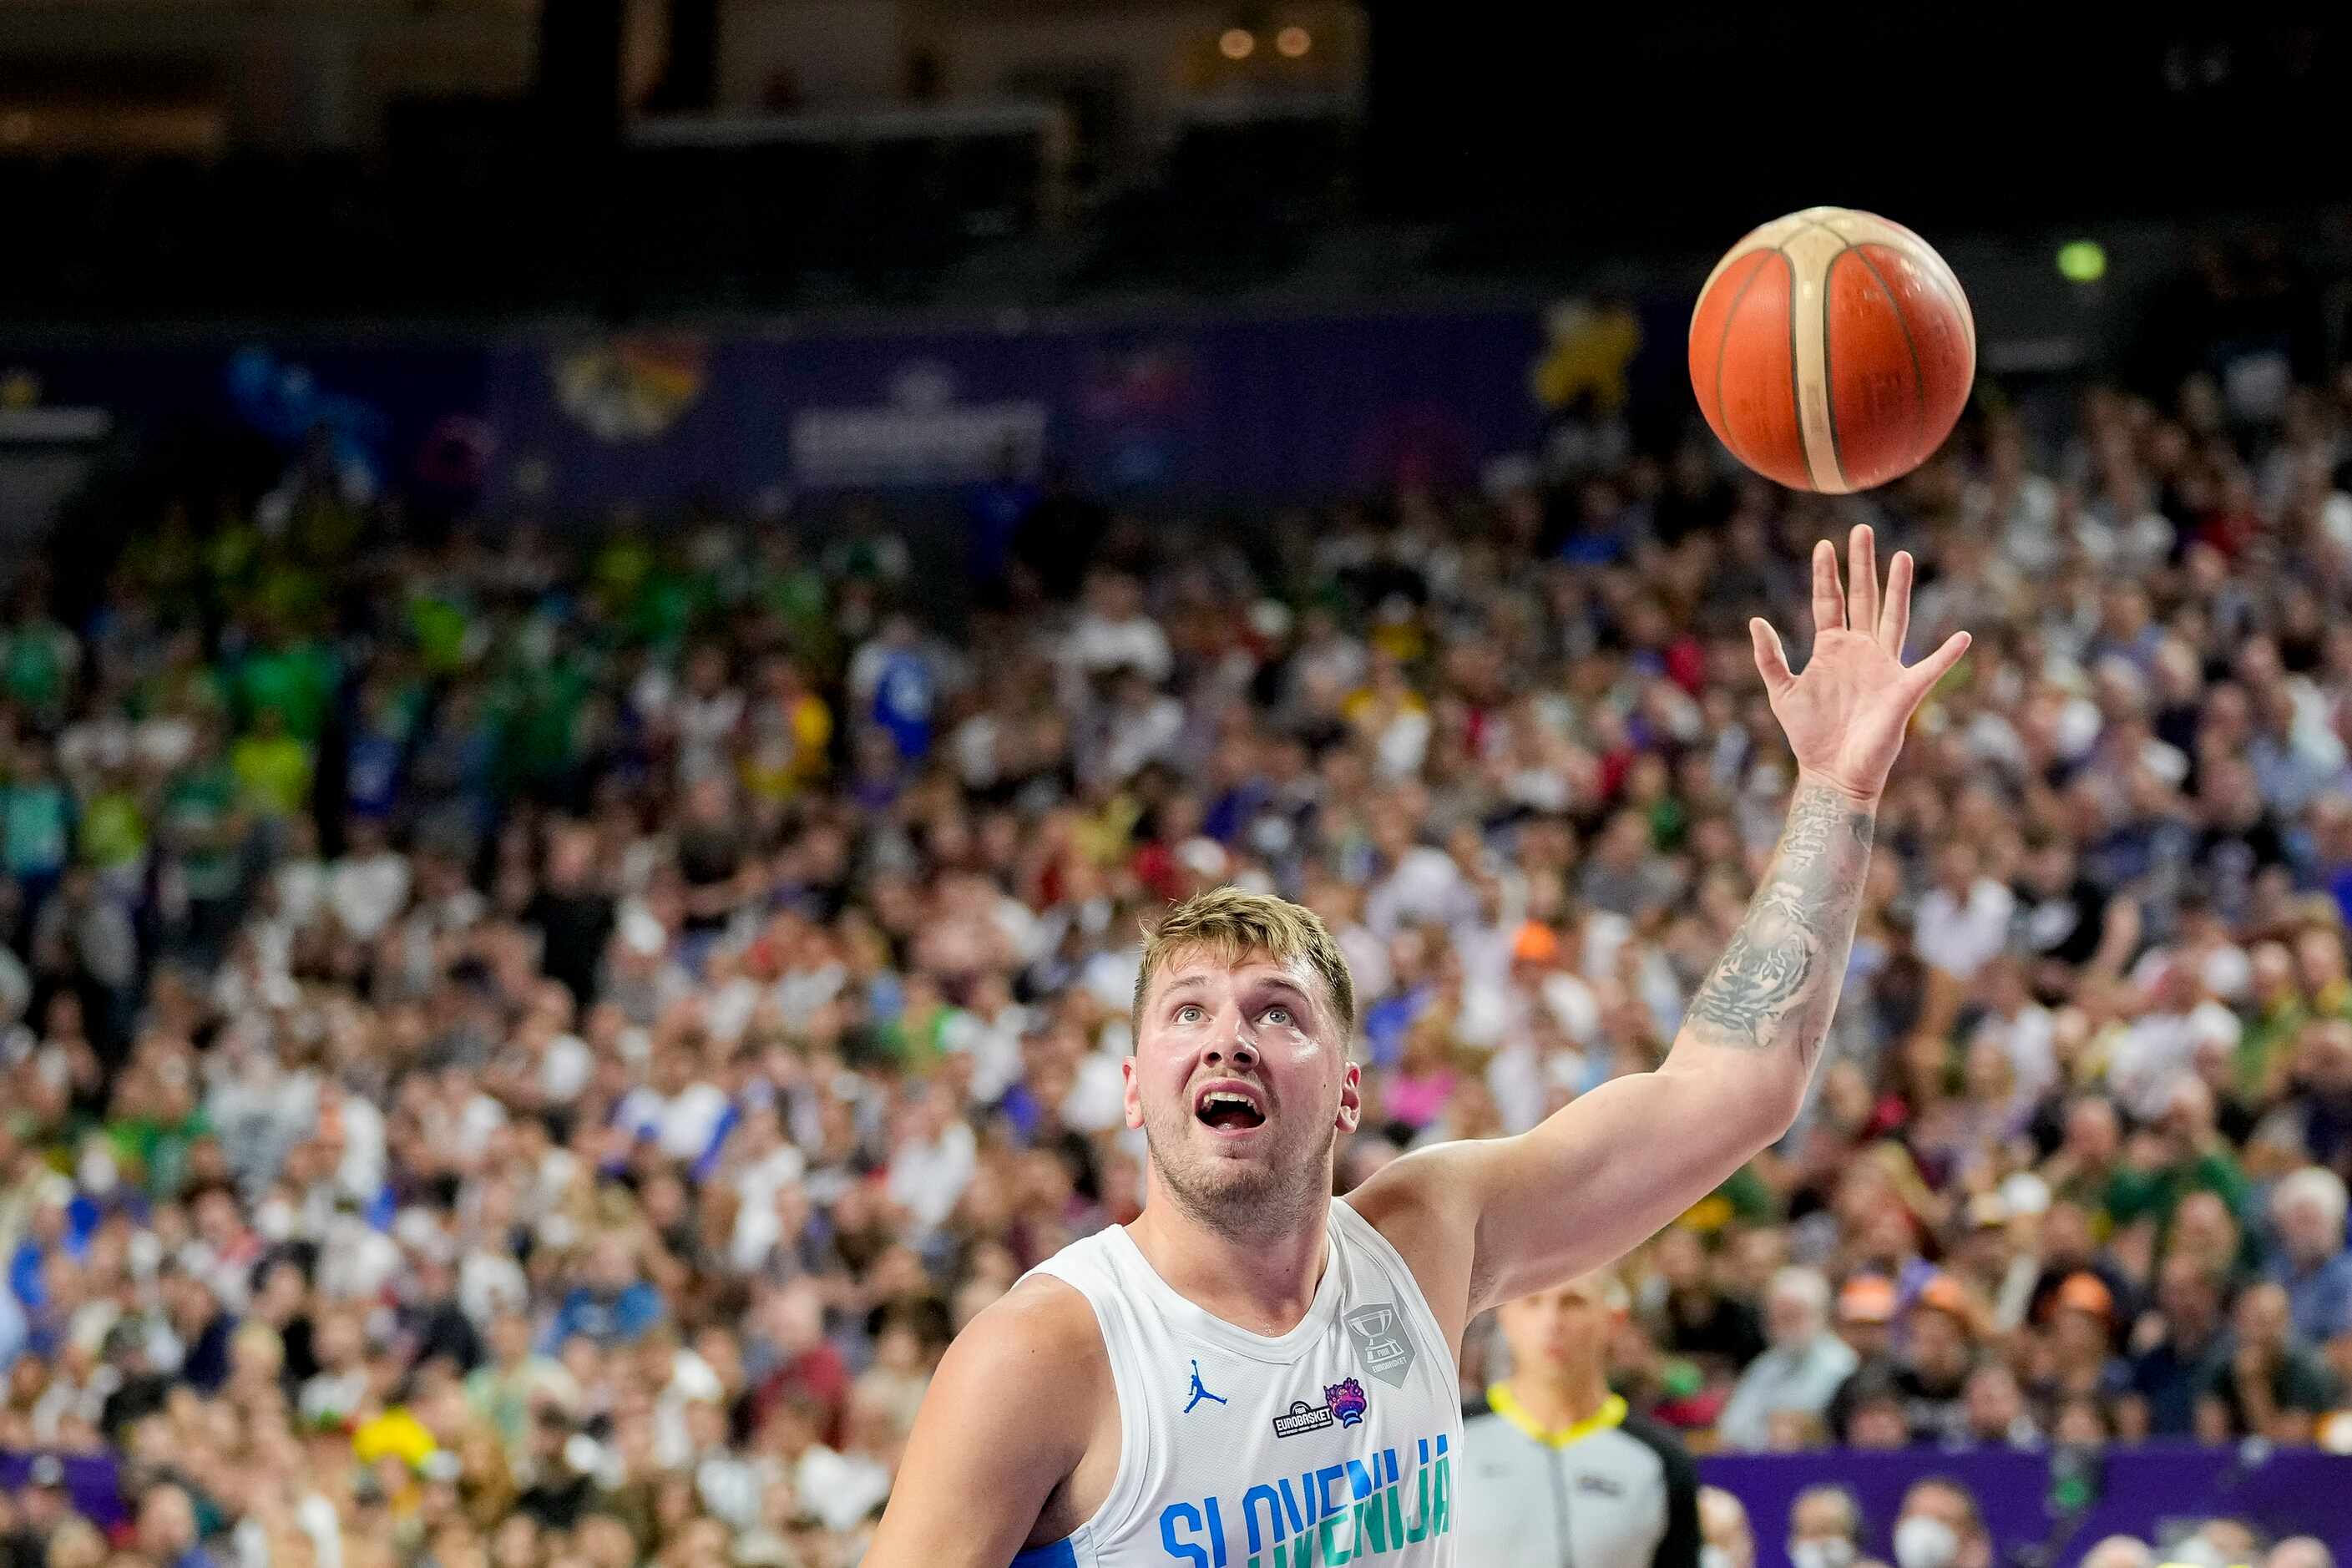 COLOGNE, GERMANY - SEPTEMBER 01: Luka Doncic of Slovenia controls the ball during the FIBA...